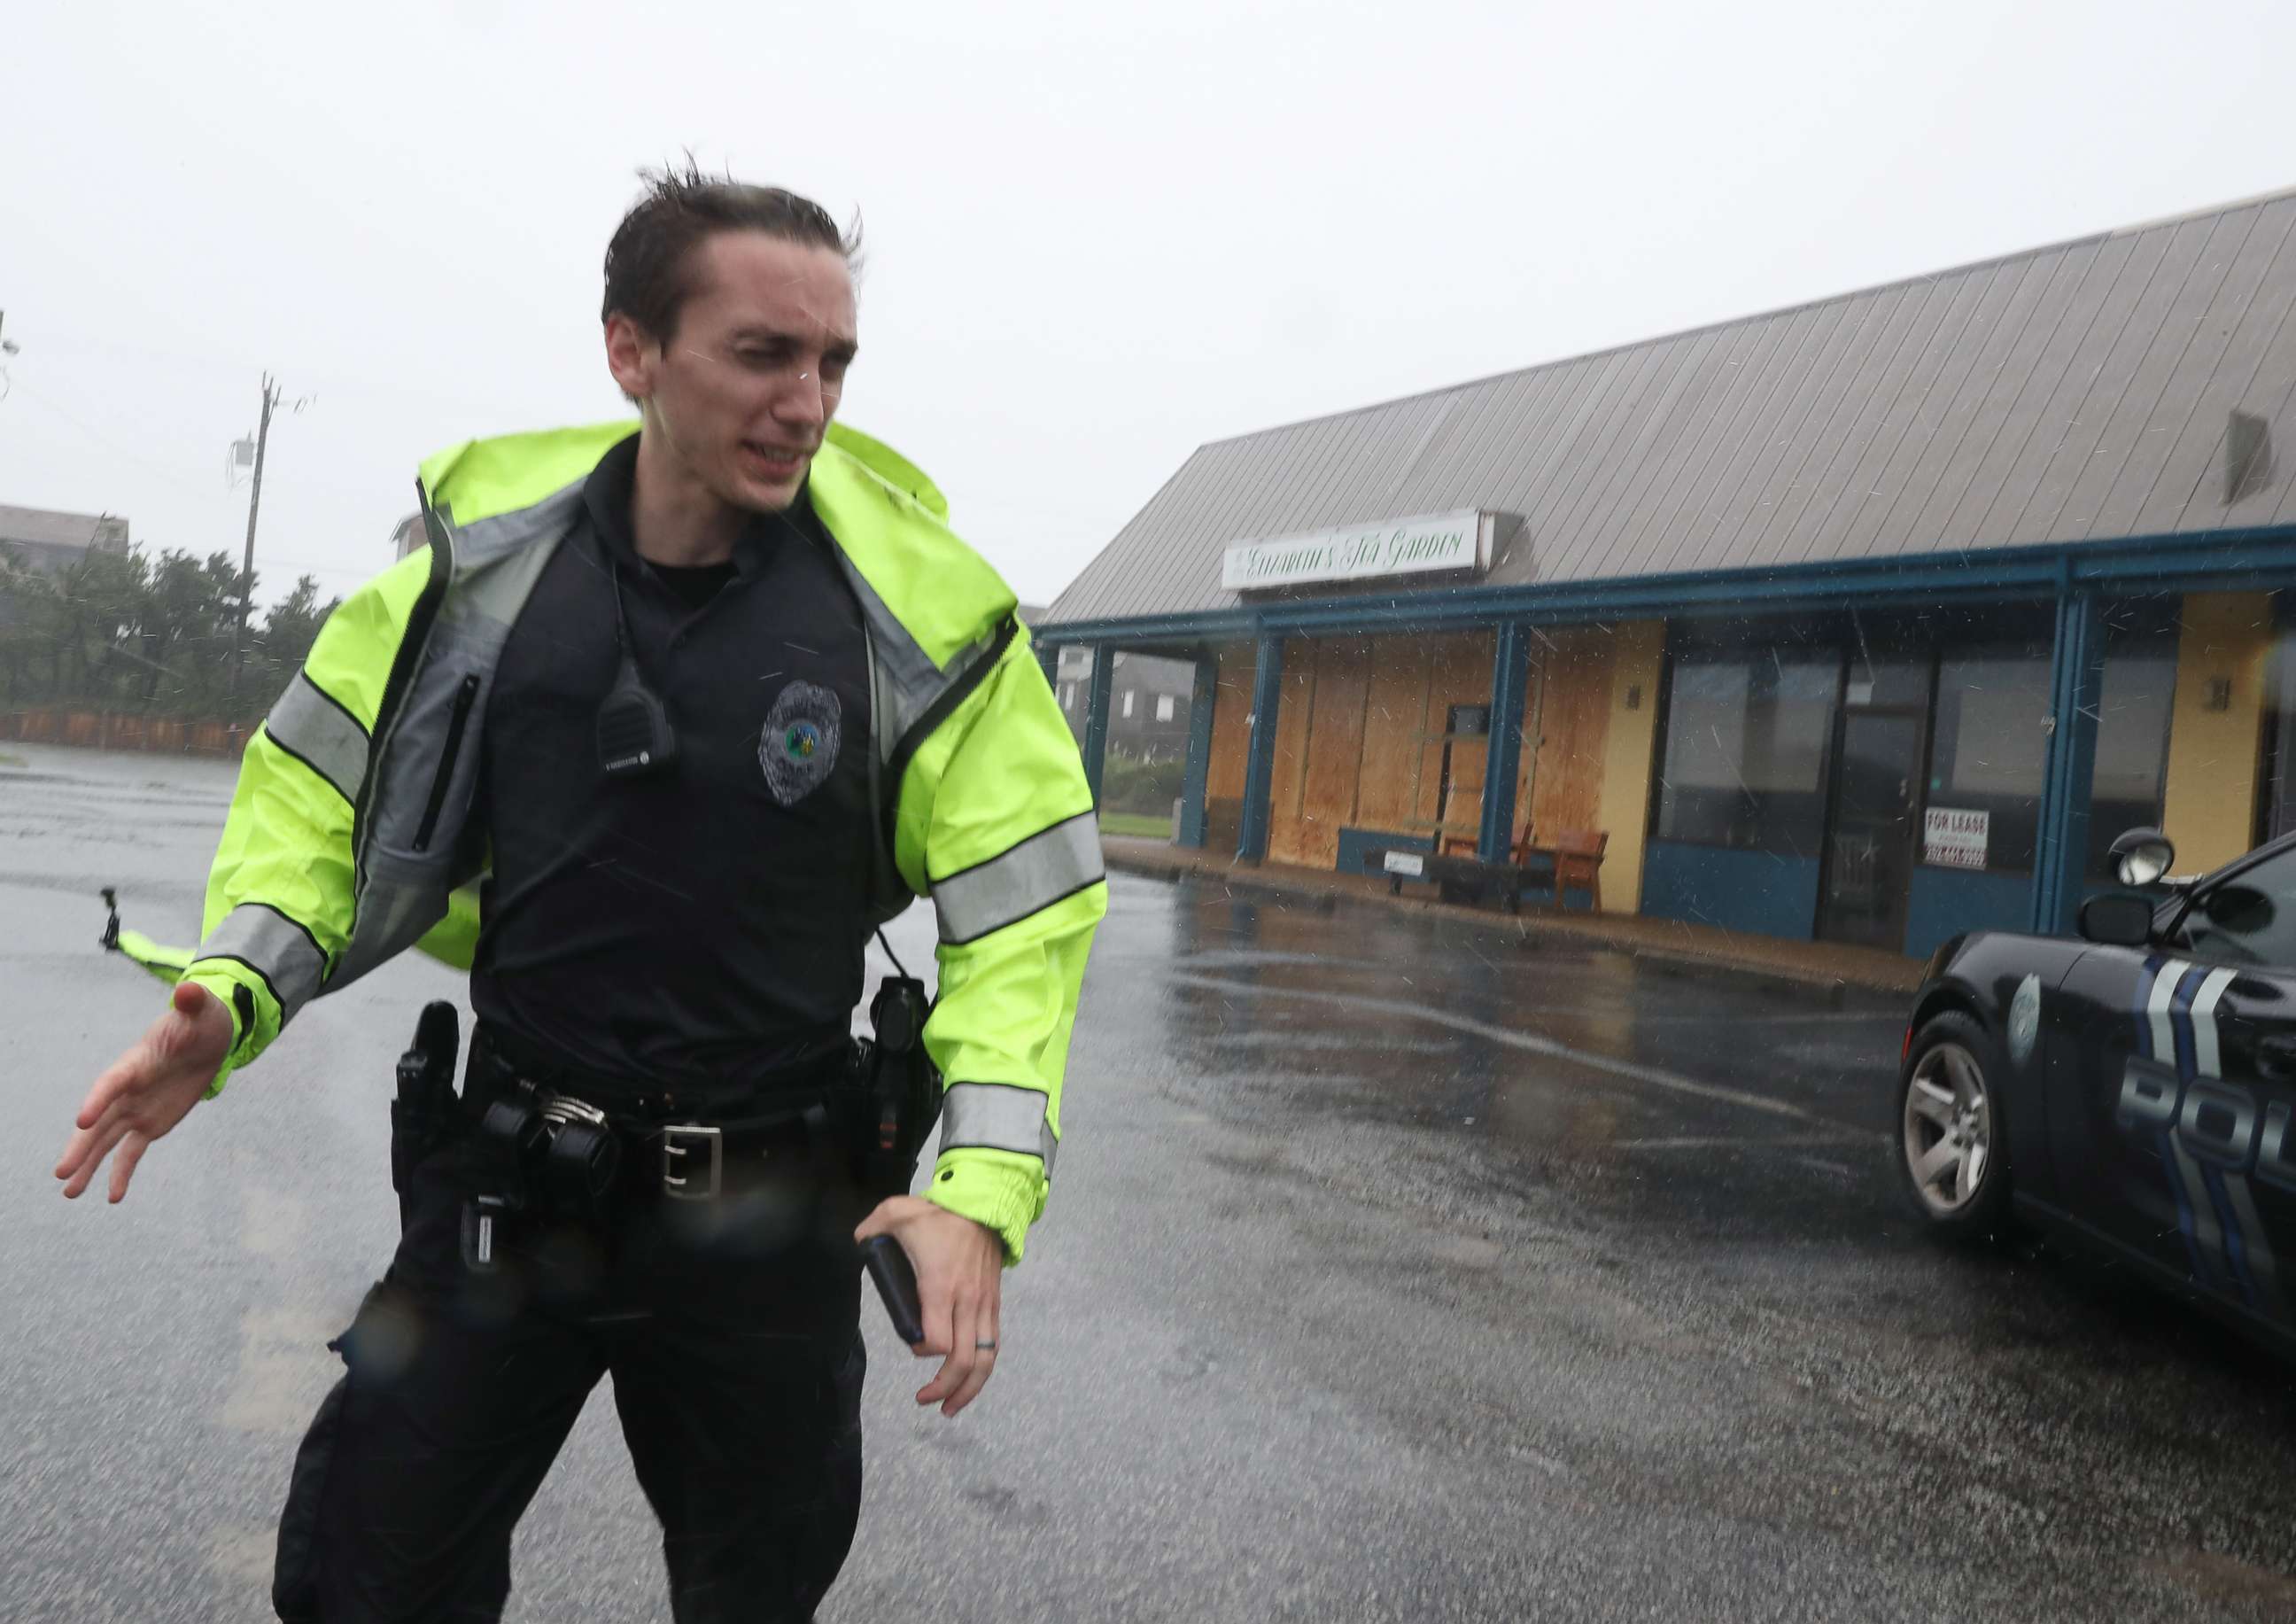 PHOTO: A police officer inspects a shopping center for damage after Hurricane Dorian hit the area, on Sept. 6, 2019 in Nags Head, N.C.